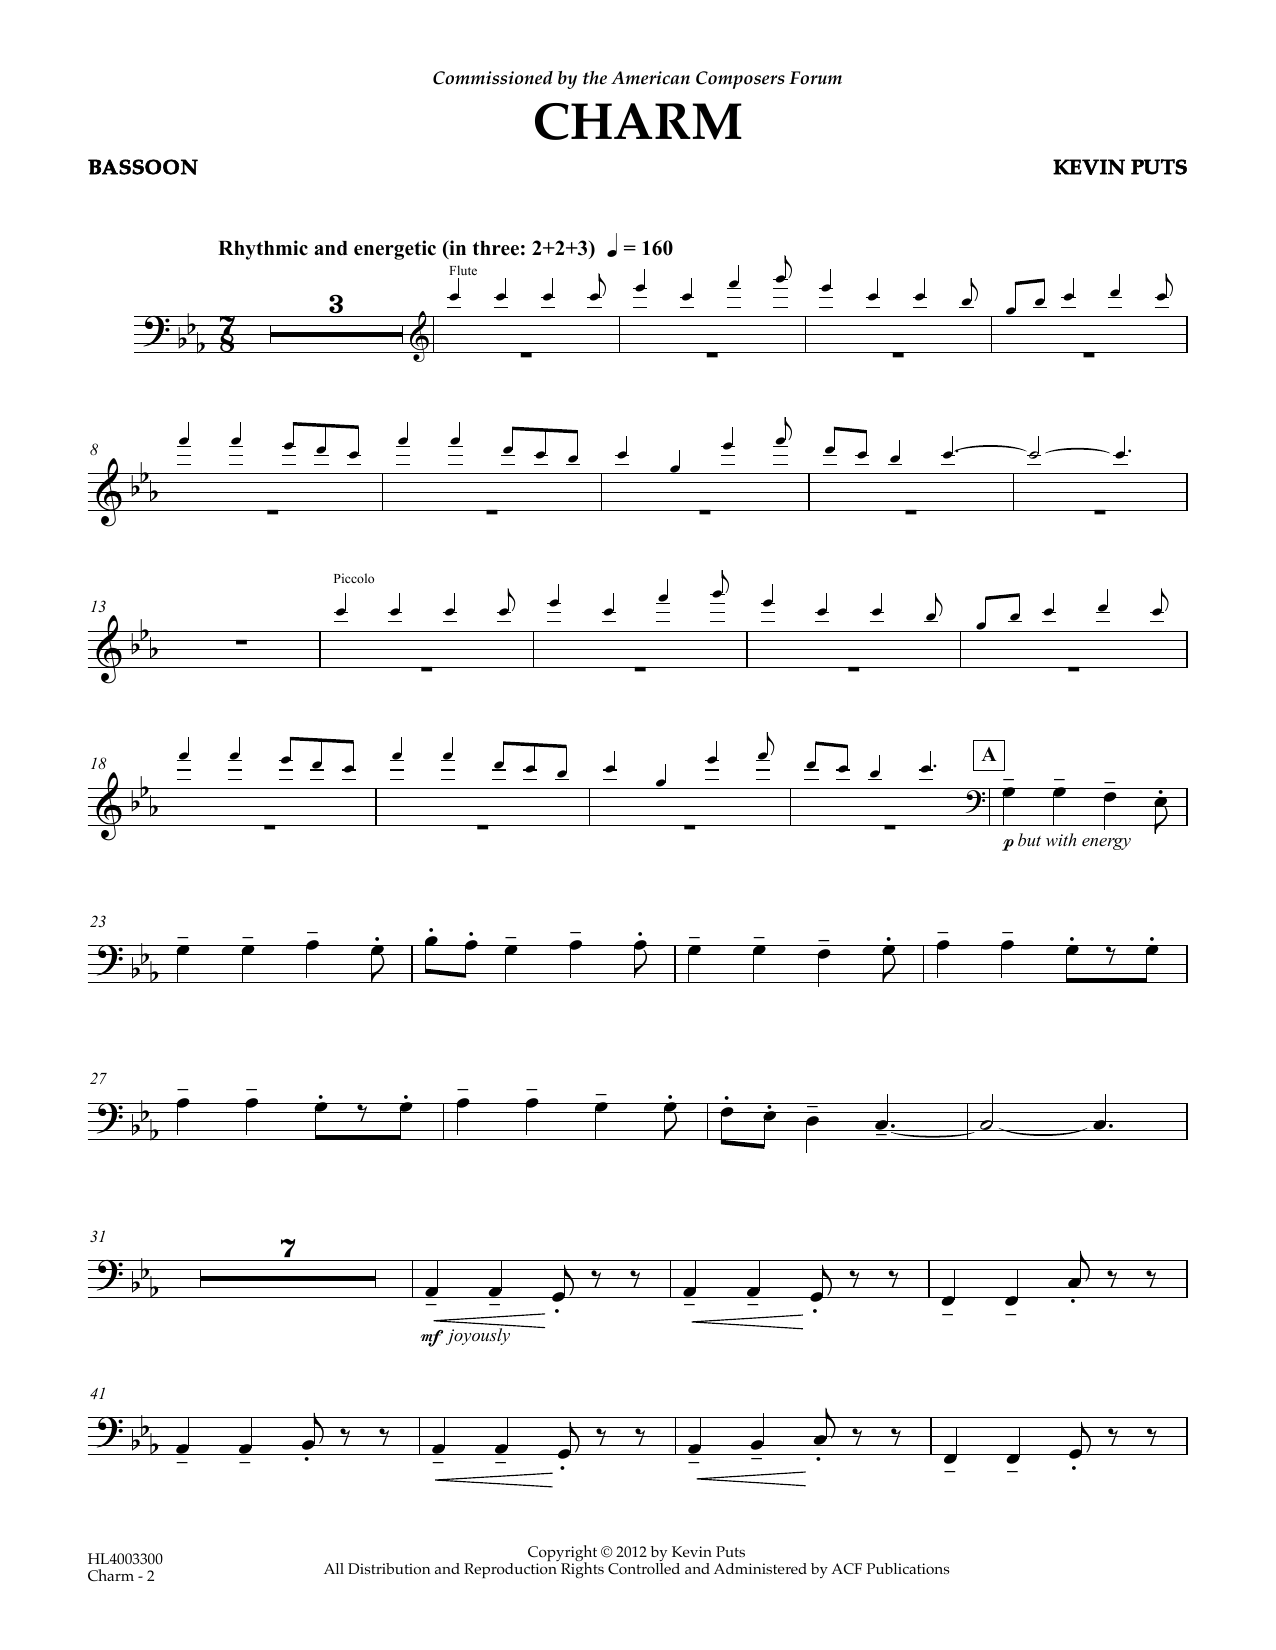 Download Kevin Puts Charm - Bassoon (opt.) Sheet Music